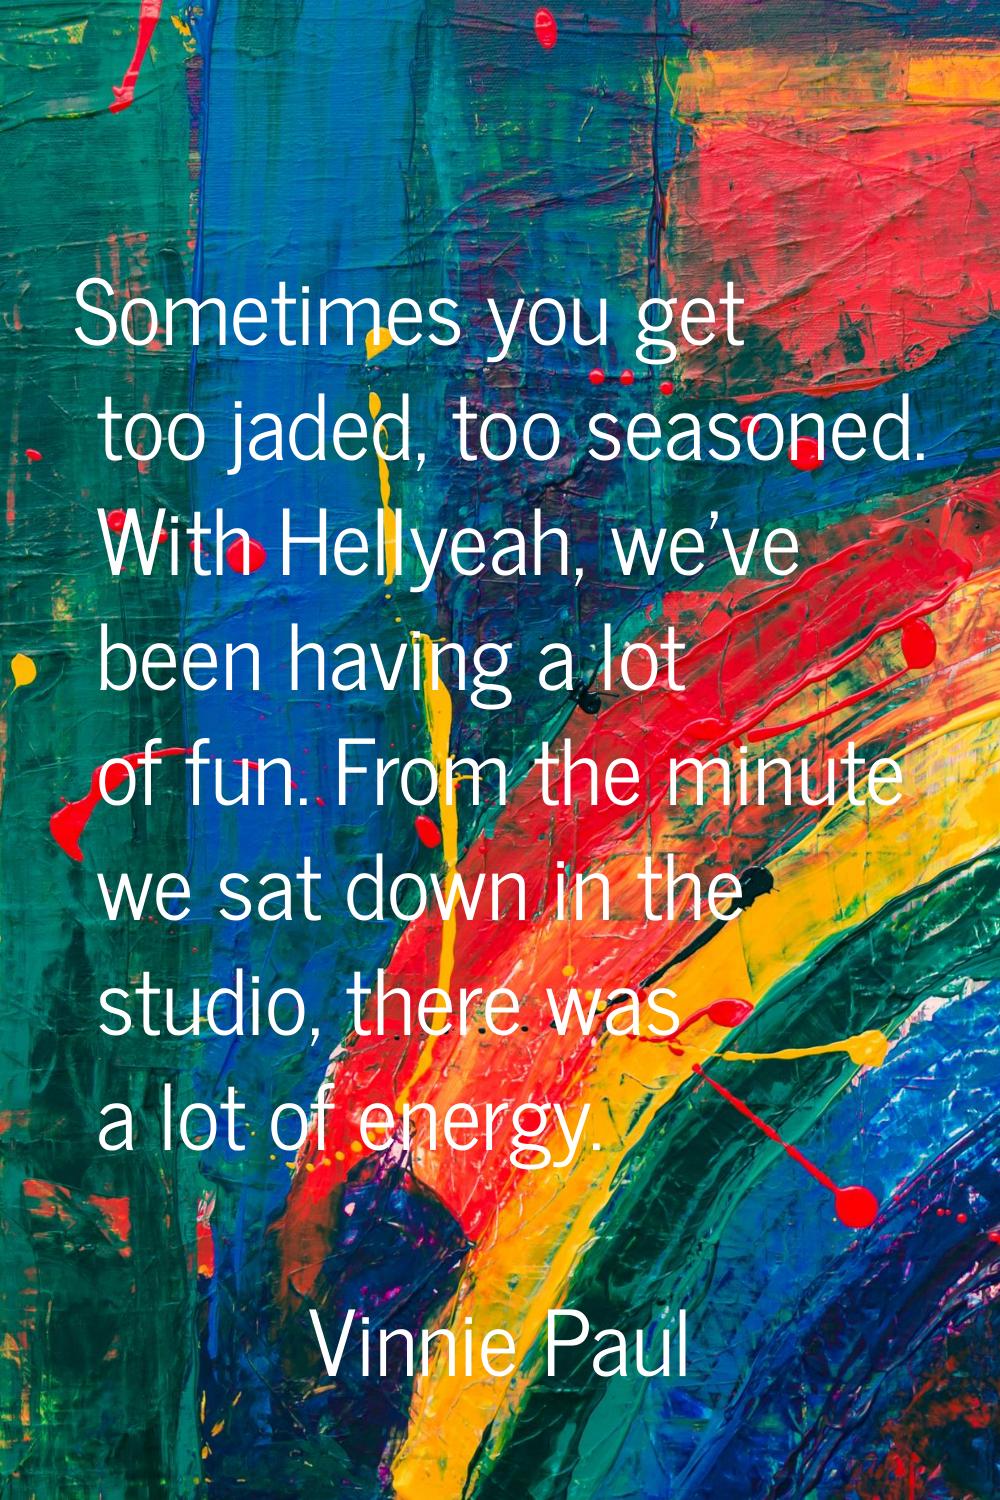 Sometimes you get too jaded, too seasoned. With Hellyeah, we've been having a lot of fun. From the 